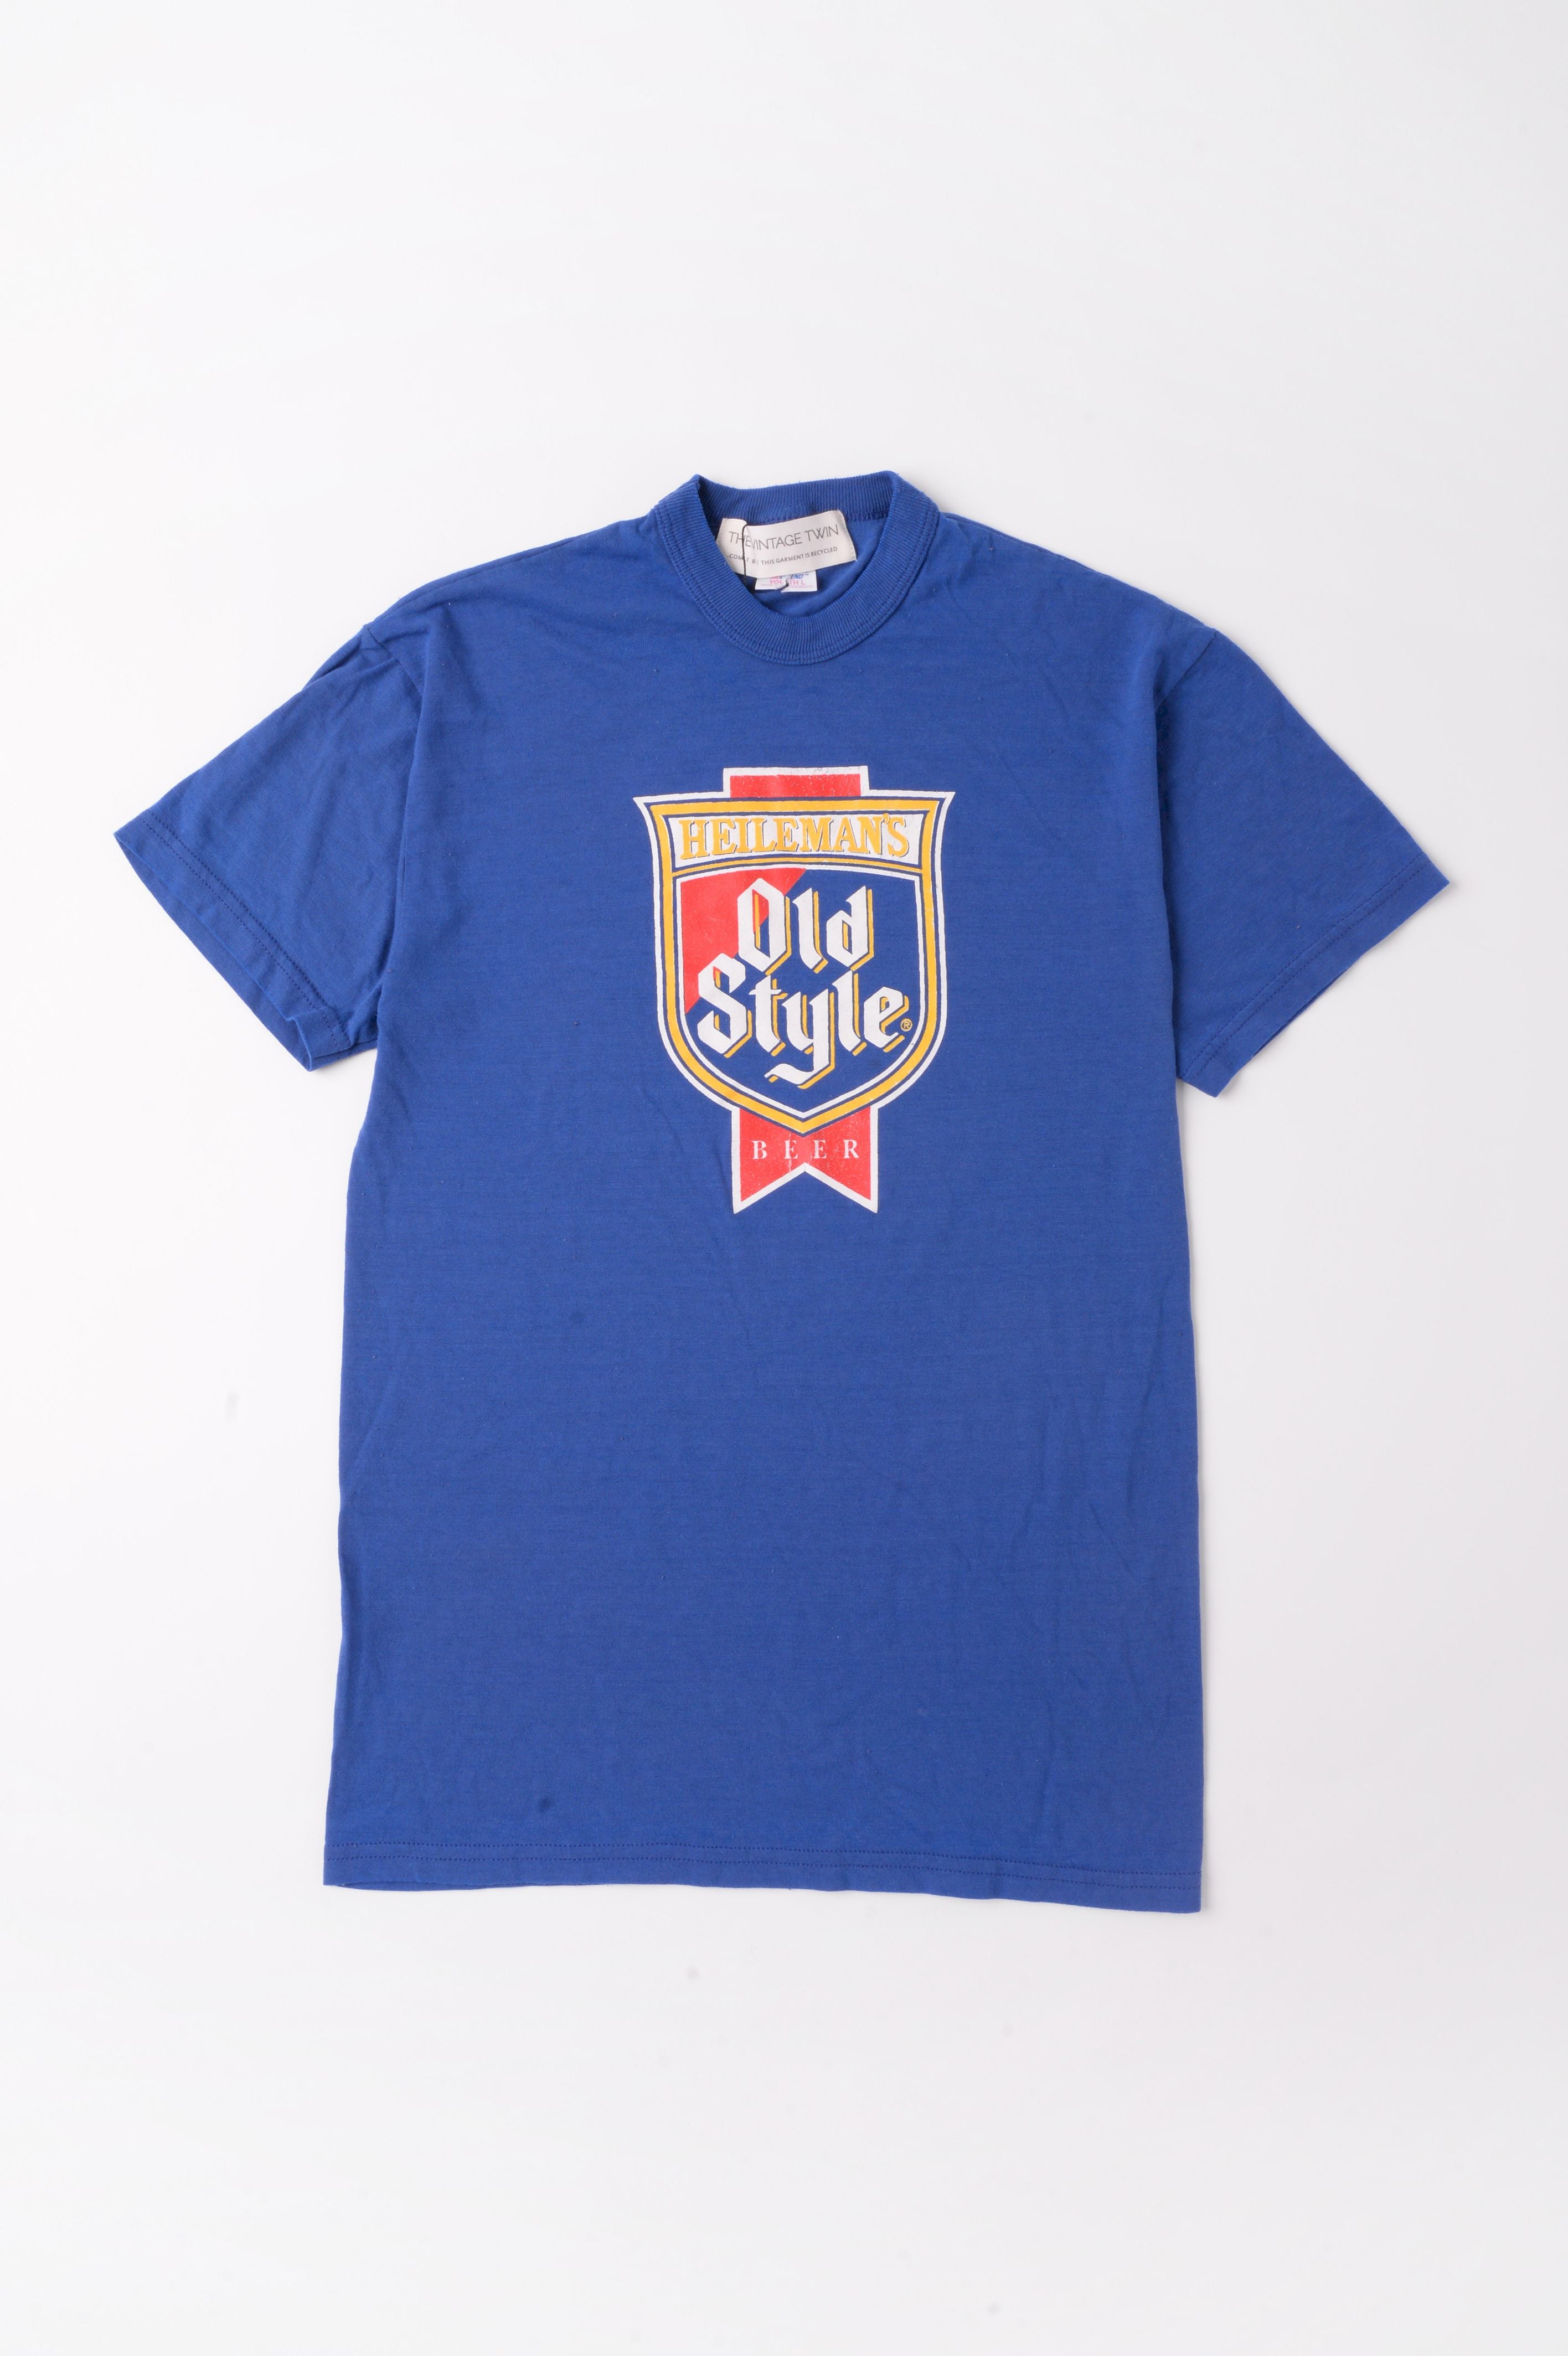 cubs old style shirt